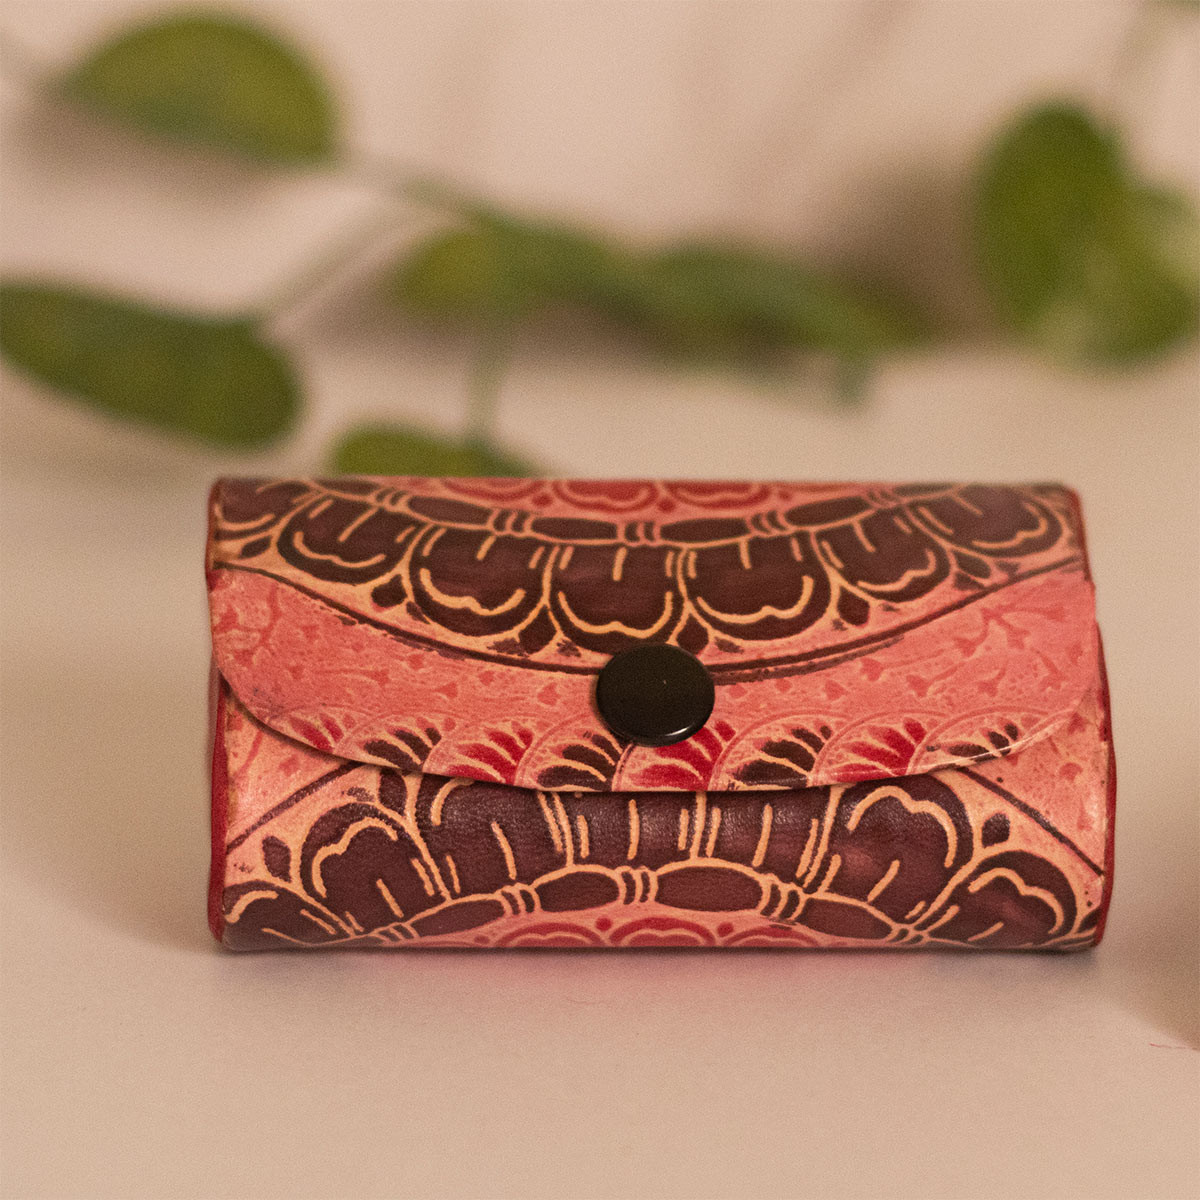 Printed Leather Lipstick Case (Beige and Brown)